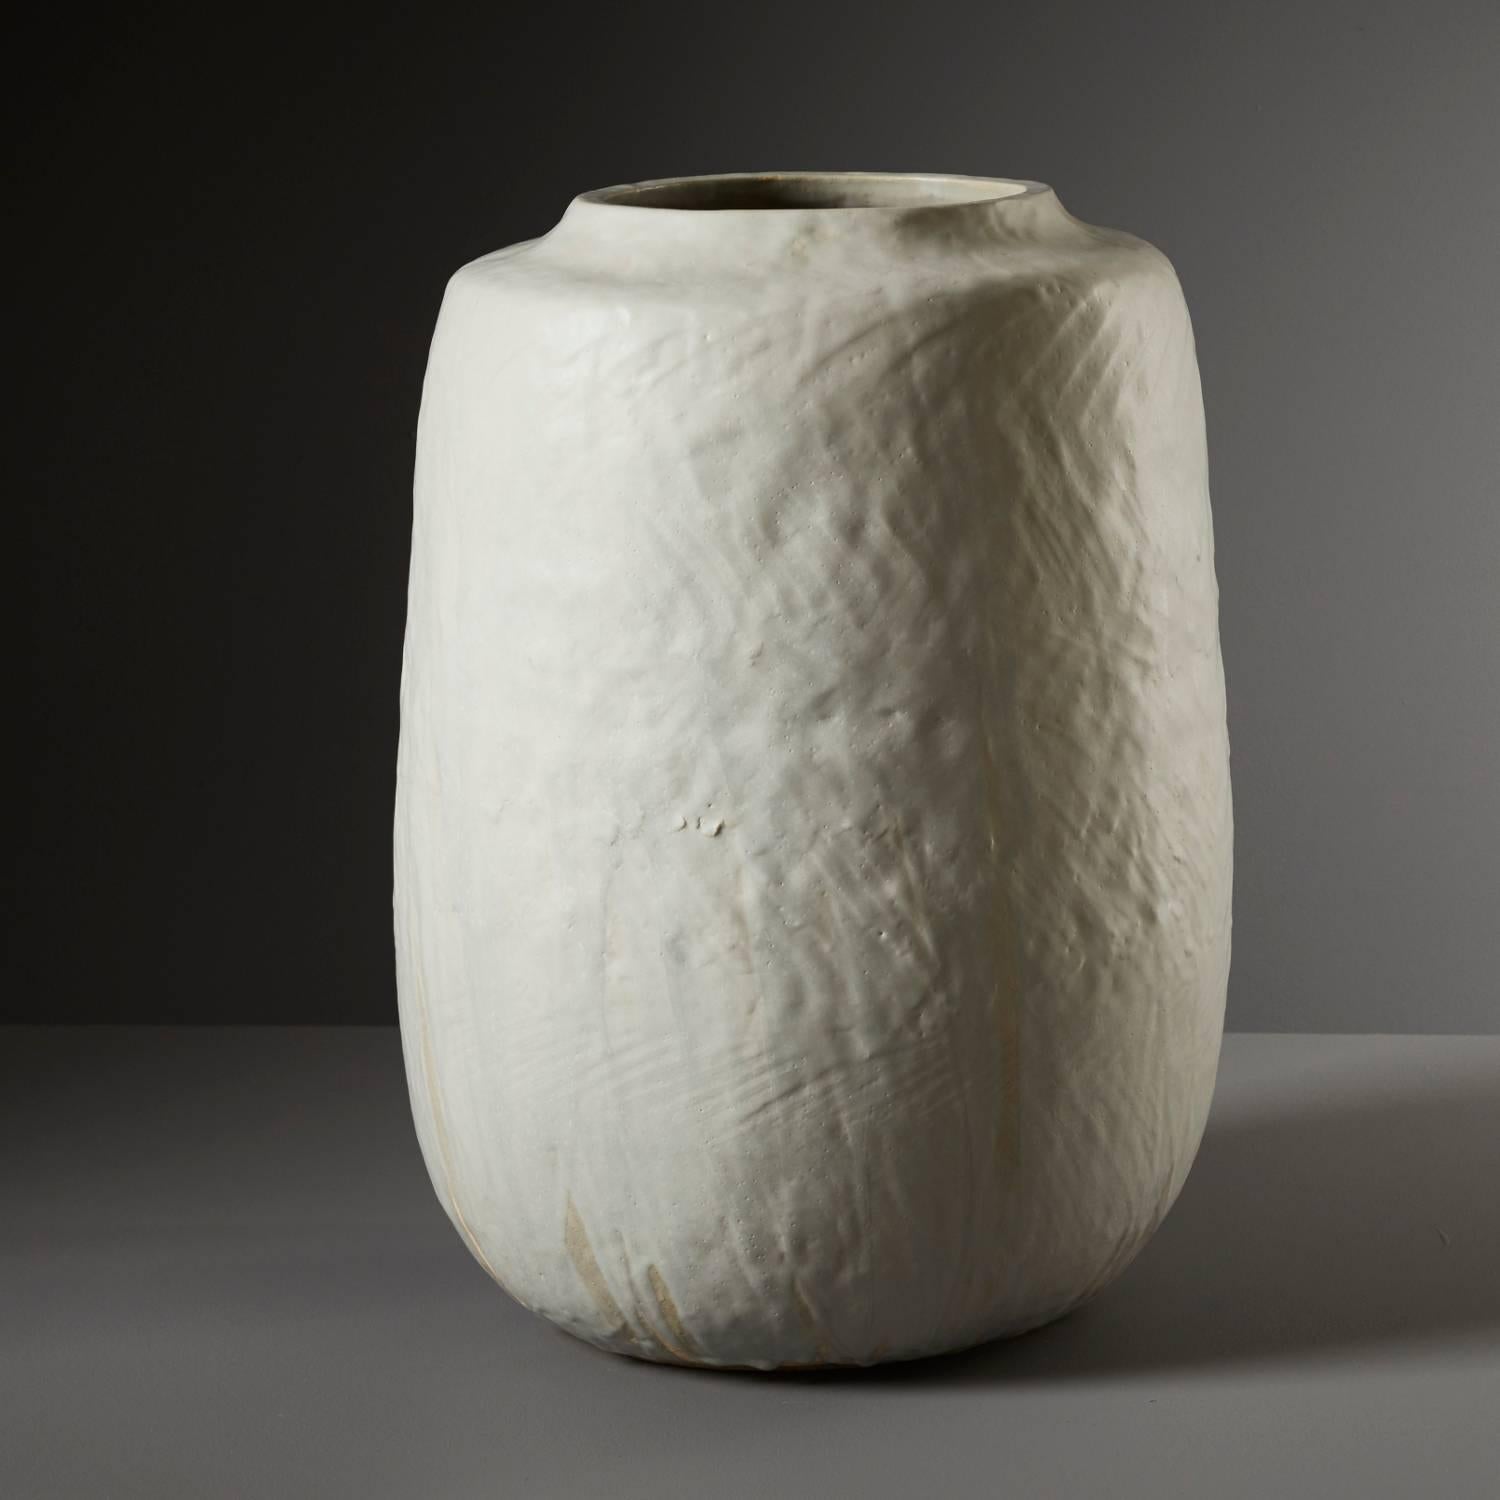 Daniel Reynold’s ‘Large White Vase’ is a curvaceous, decorative piece, composed to complement any interior. Hand built in stoneware clay, this minimal work is deceptively detailed. This layered finish is achieved by applying a slate grey dolomite